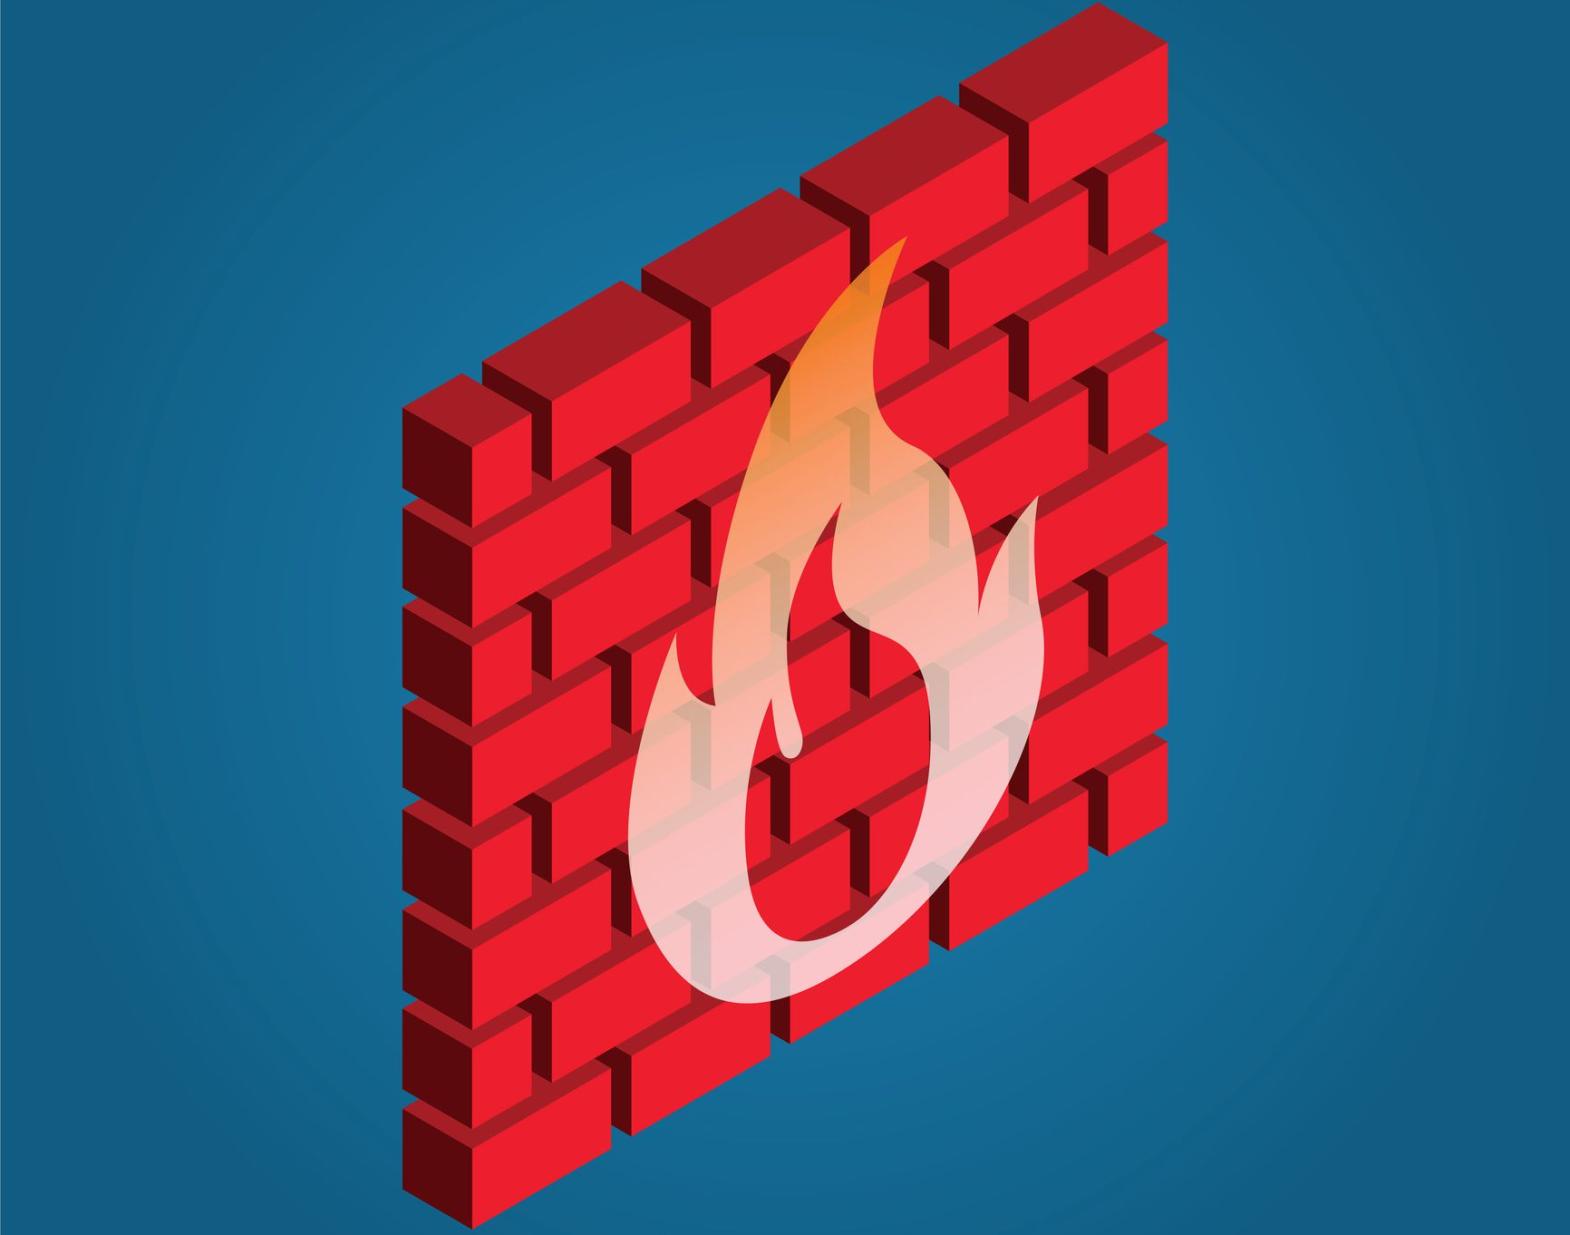 What Are the Benefits of Using a Firewall?